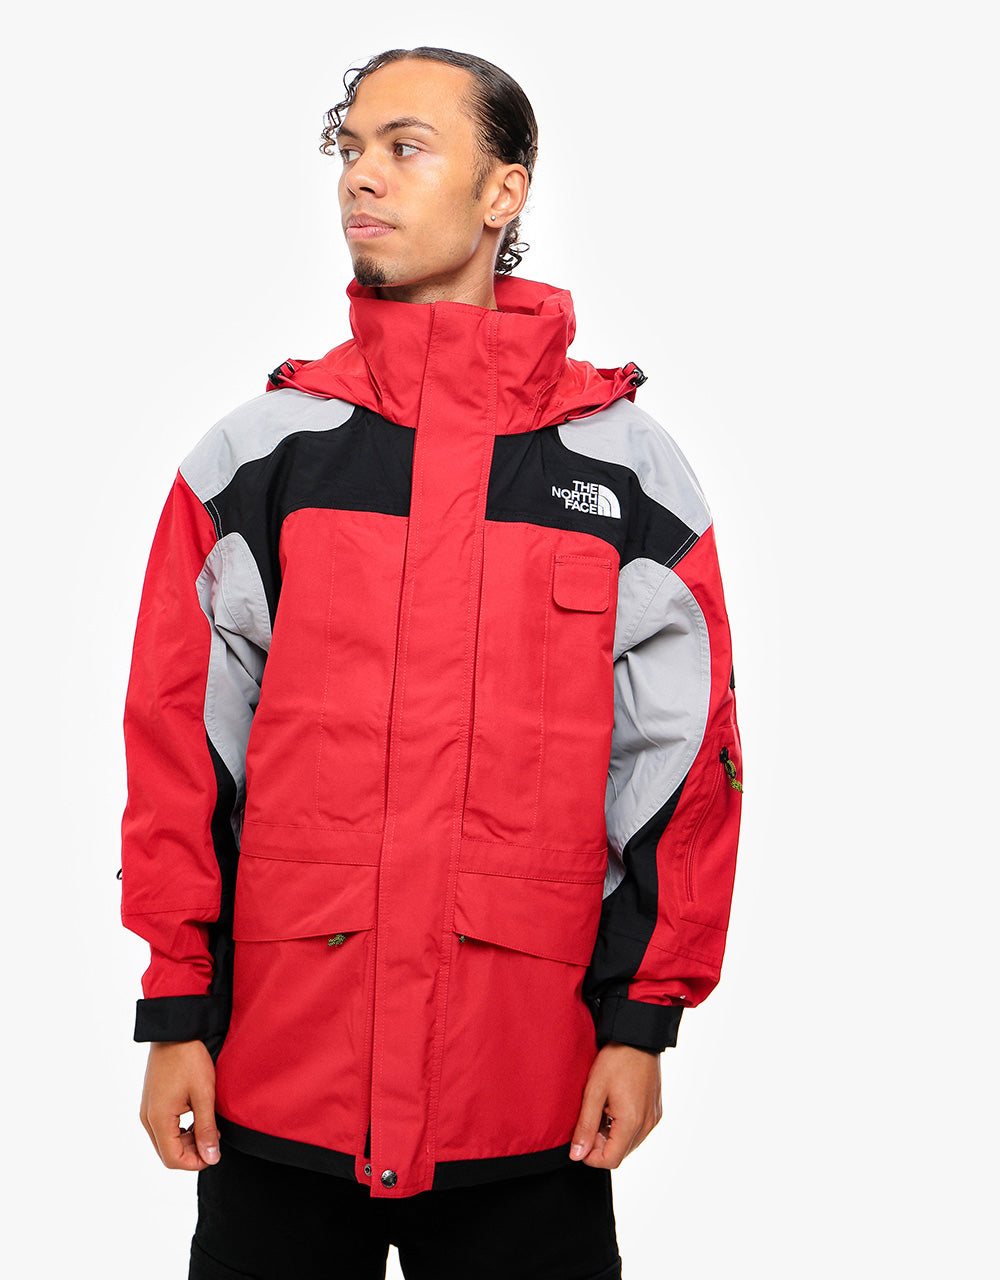 The North Face Black Box Search u0026 Rescue Dryvent Jacket - TNF Red